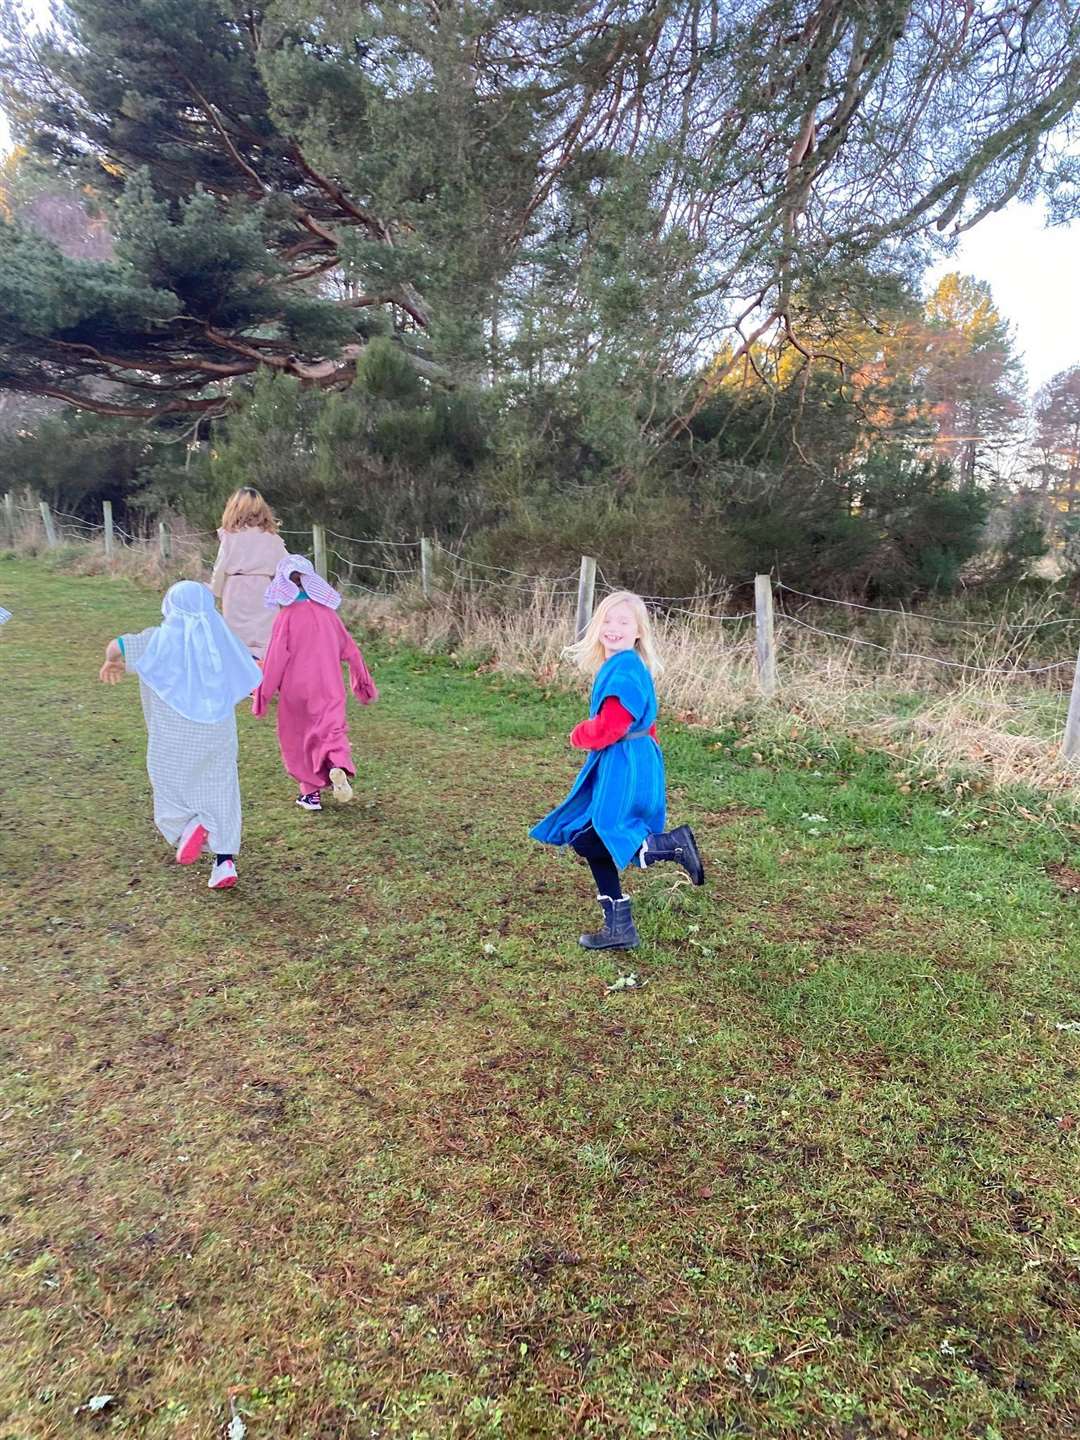 School shepherds including Aila Gibson running to pick up their presents hanging on trees in the woods.